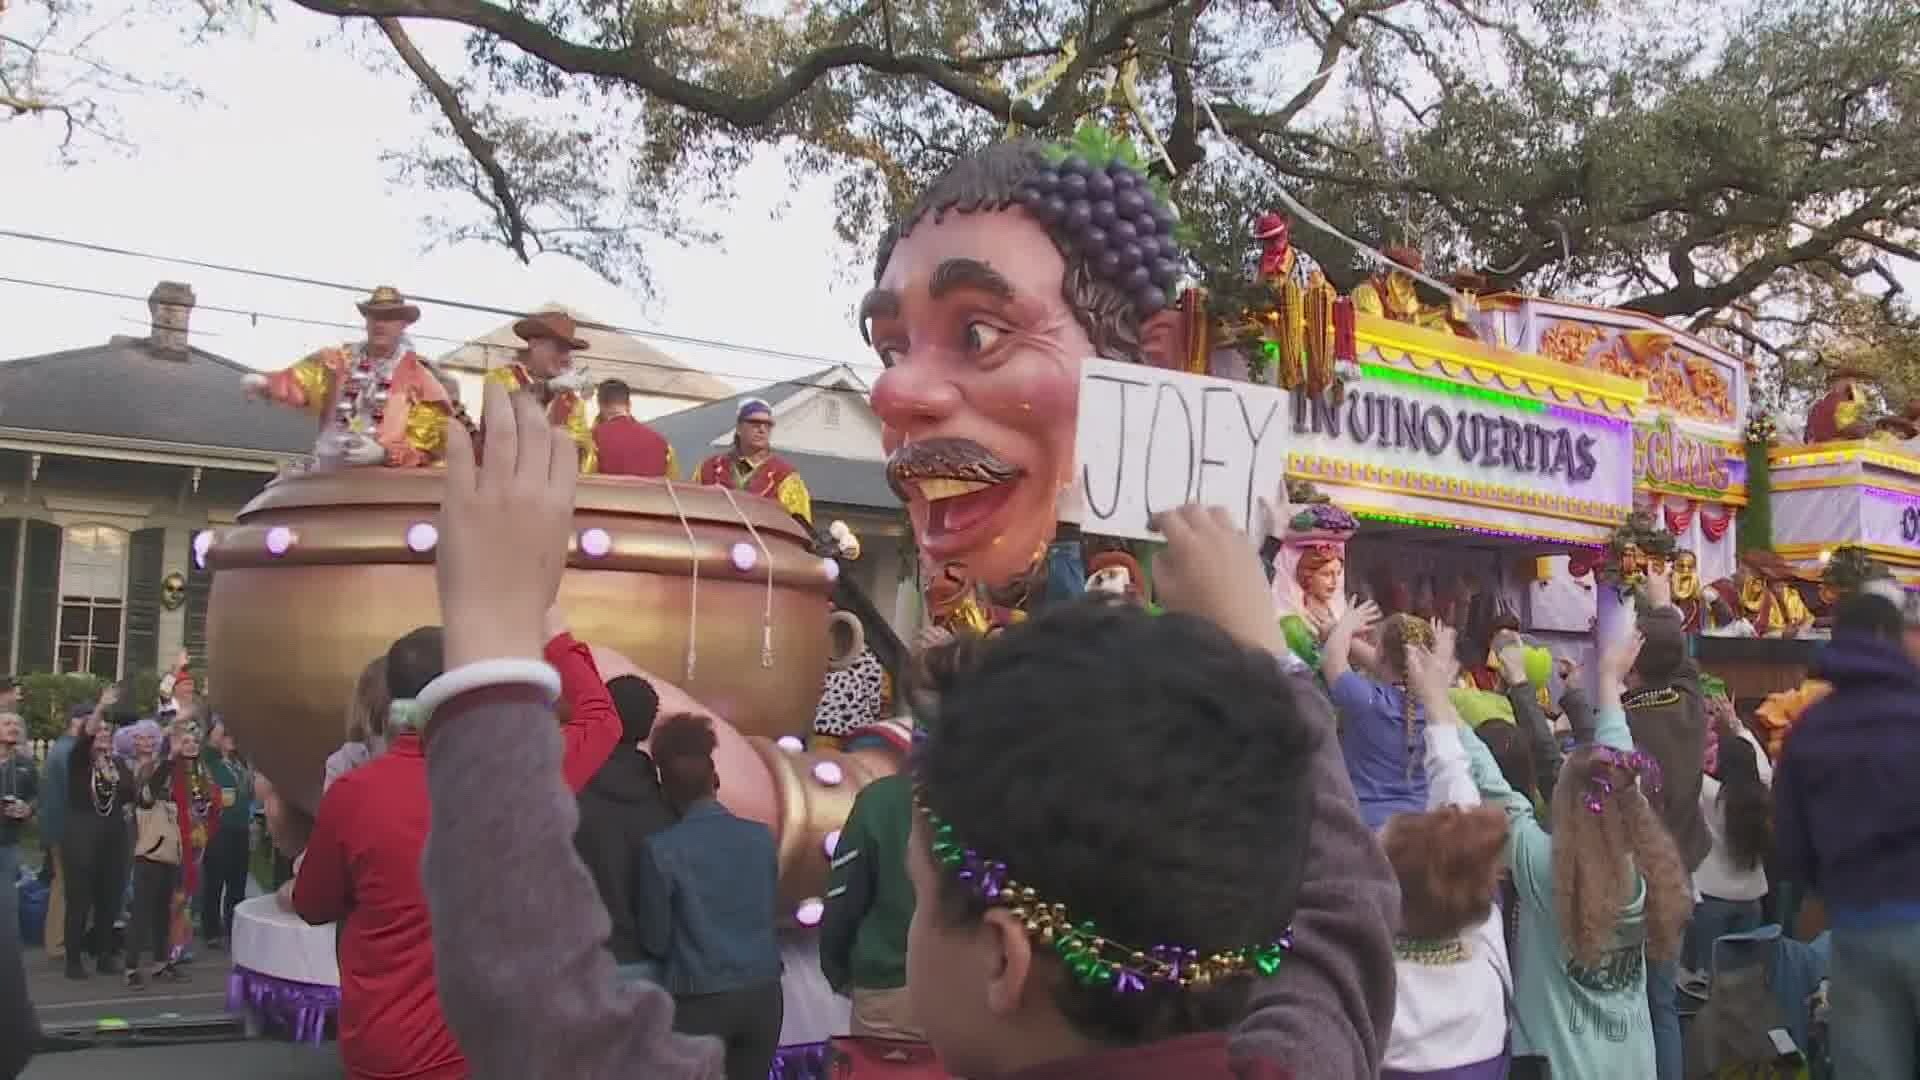 A statement from the city did not go in to what that "new reality" would be, but there is a meeting by city officials to discuss Mardi Gras Thursday.